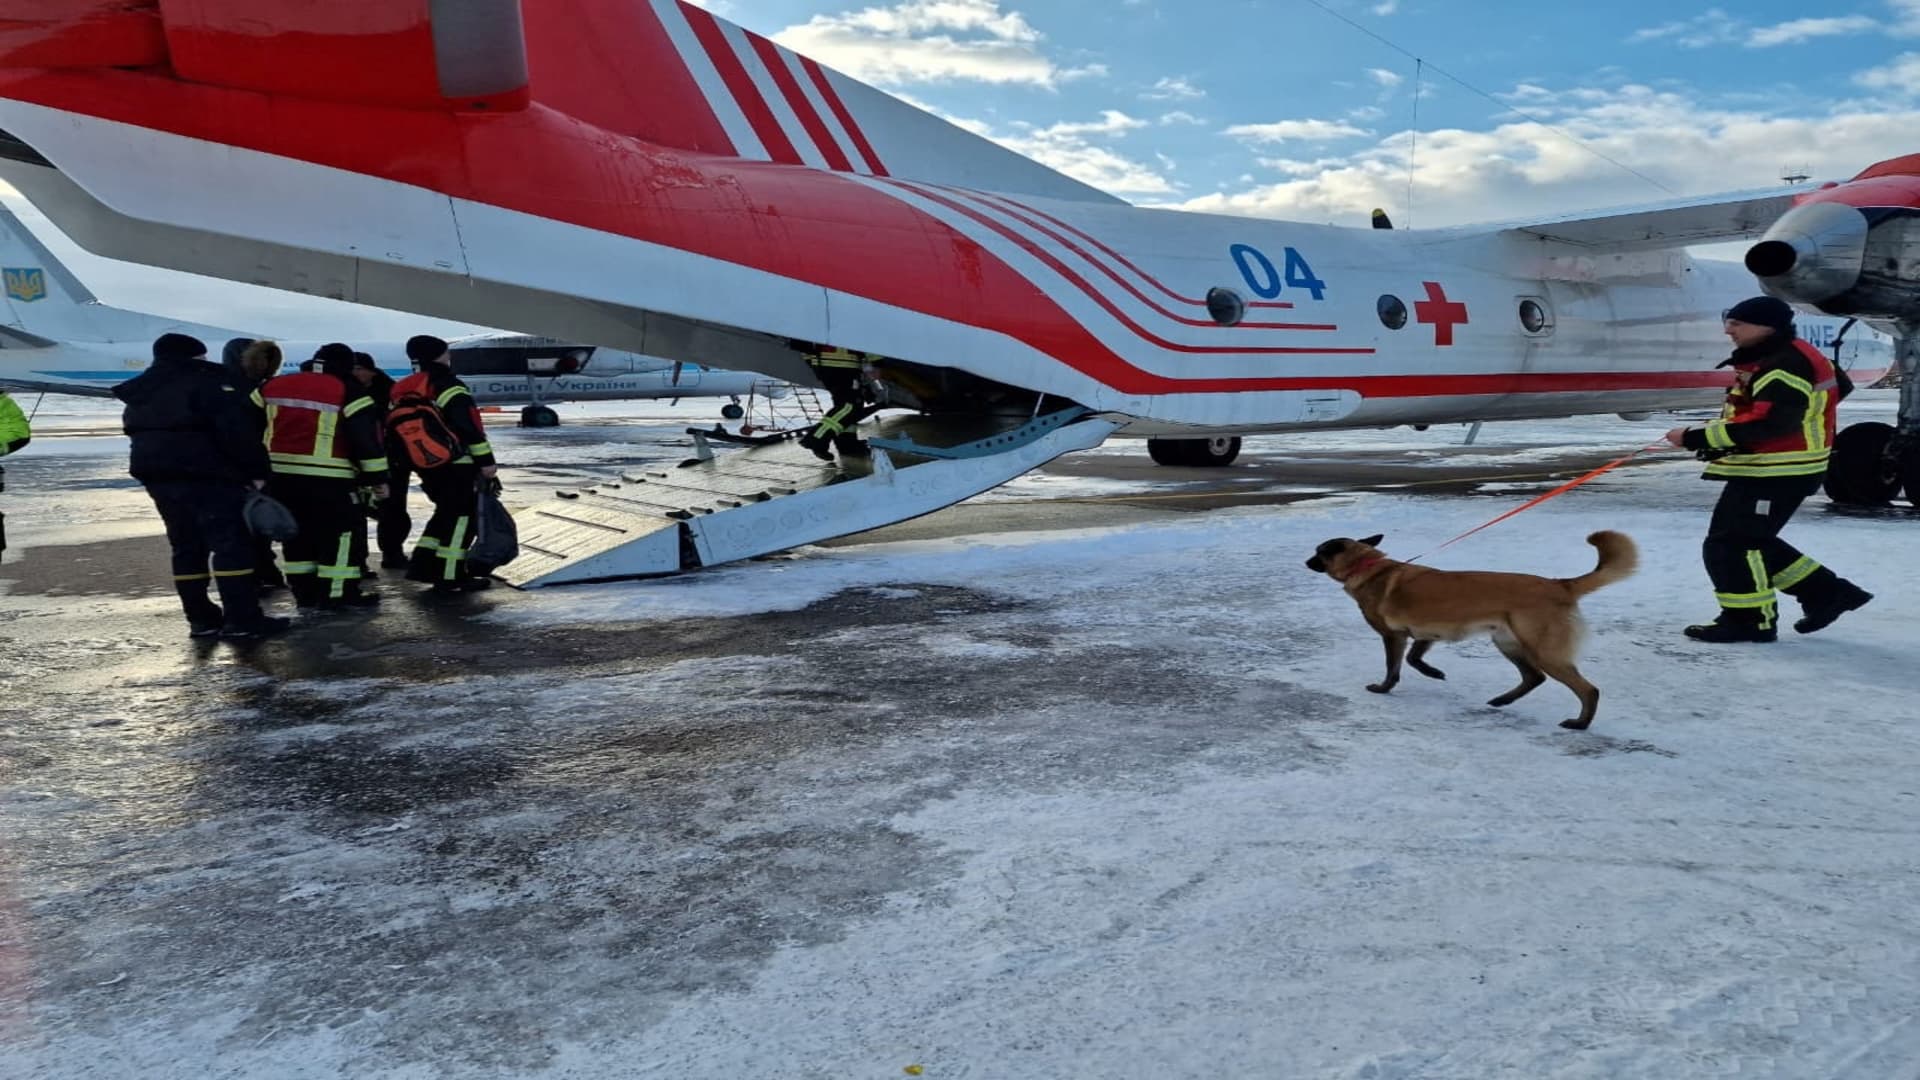 Rescuers of the State Emergency of Ukraine board a plane, on their way to help find survivors of the deadly earthquake in Turkey, at an unknown location in Ukraine February 7, 2023.